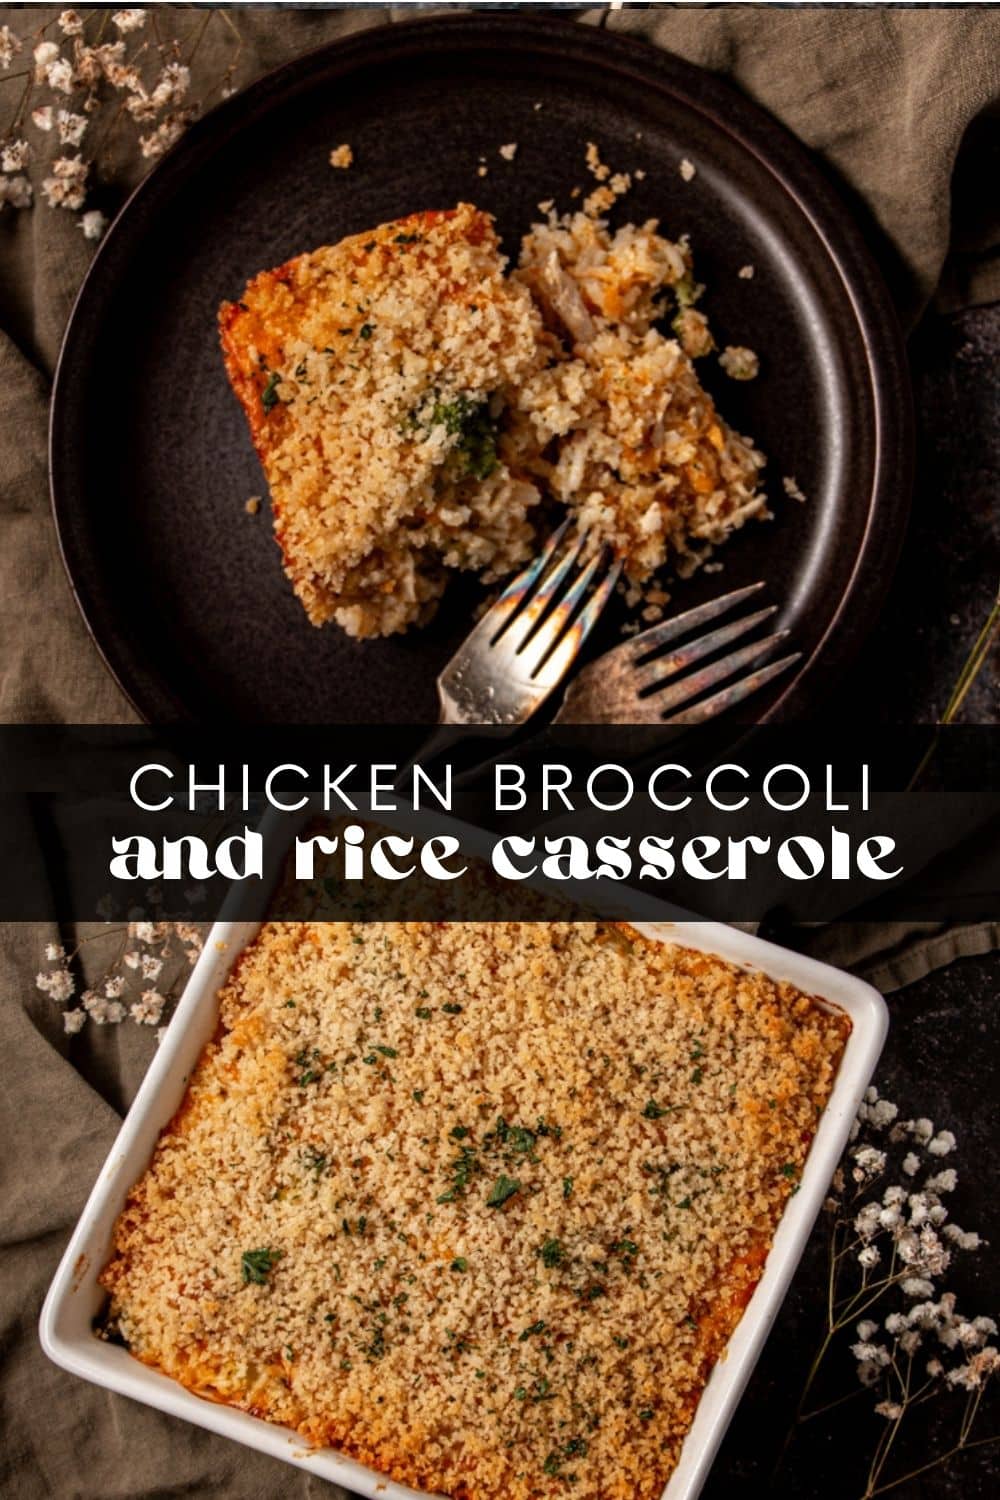 Chicken rice broccoli casserole is the perfect weeknight meal for busy families. Leftover cooked chicken, broccoli (fresh or frozen!), and a creamy, cheesy sauce come together to create a comforting casserole that's easier to make than you think!